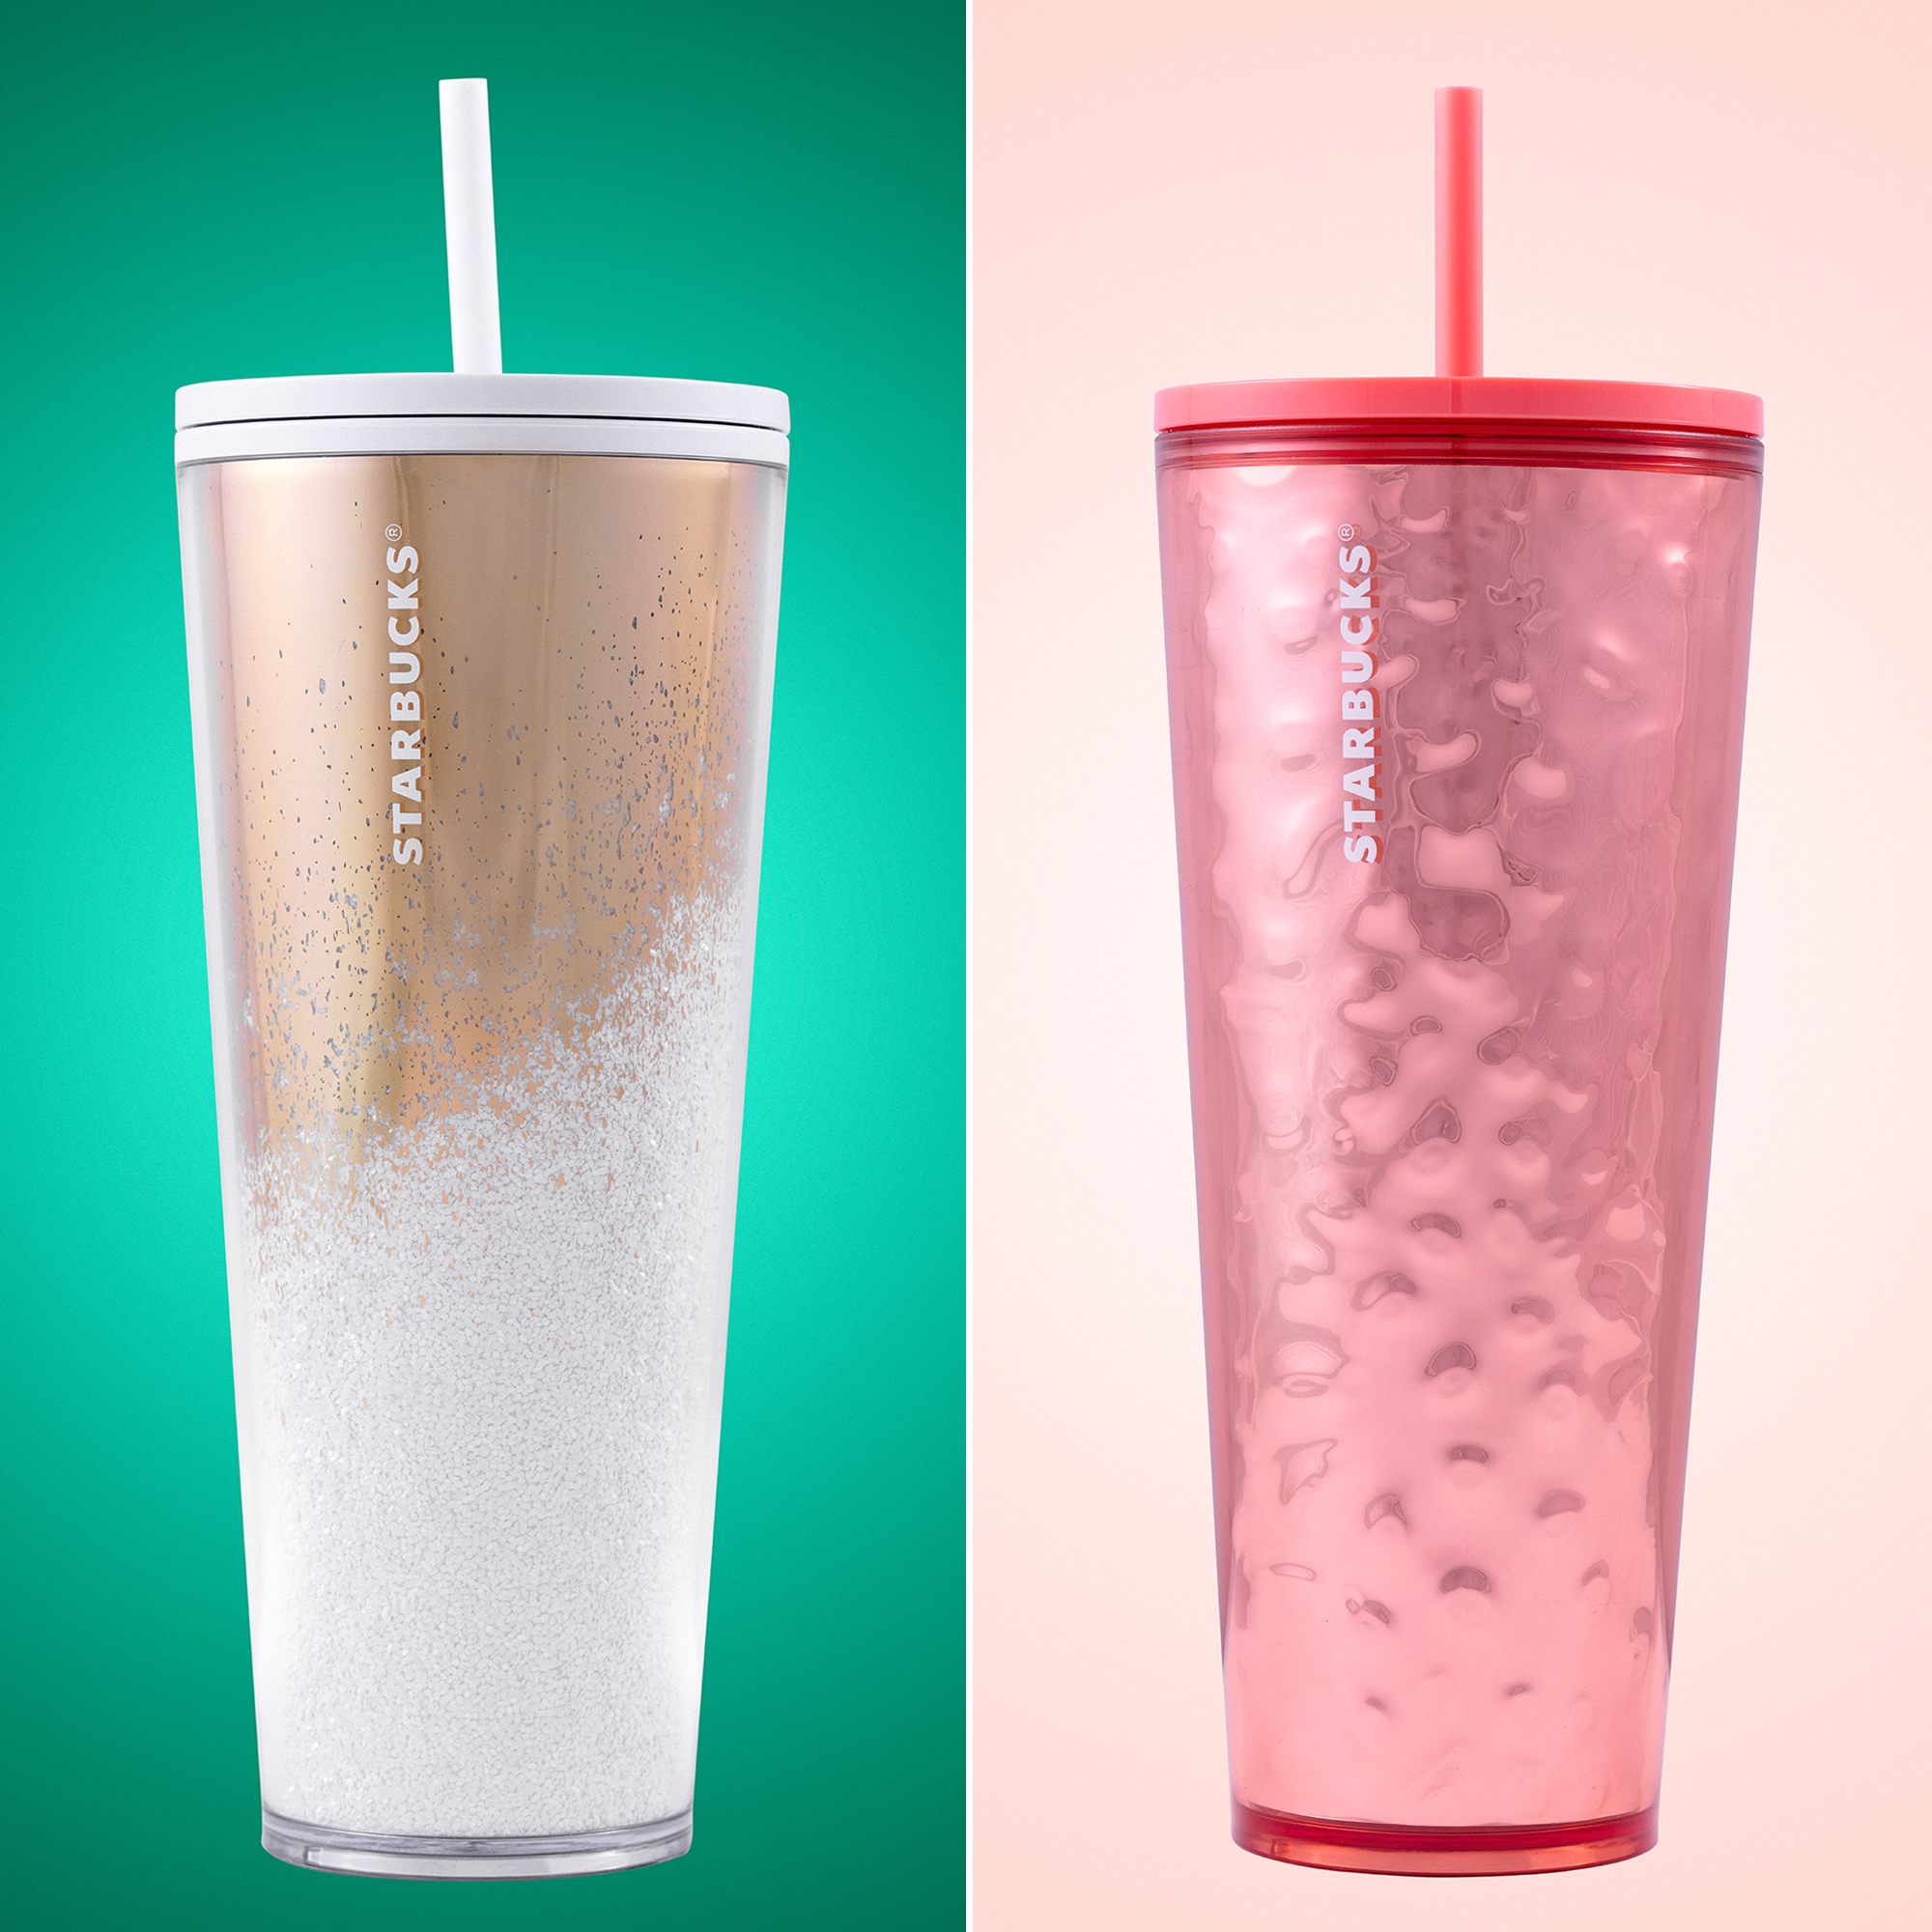 https://www.usmagazine.com/wp-content/uploads/2019/09/Starbucks-Unveils-New-Holiday-Cup-Lineup-PP.jpg?quality=86&strip=all